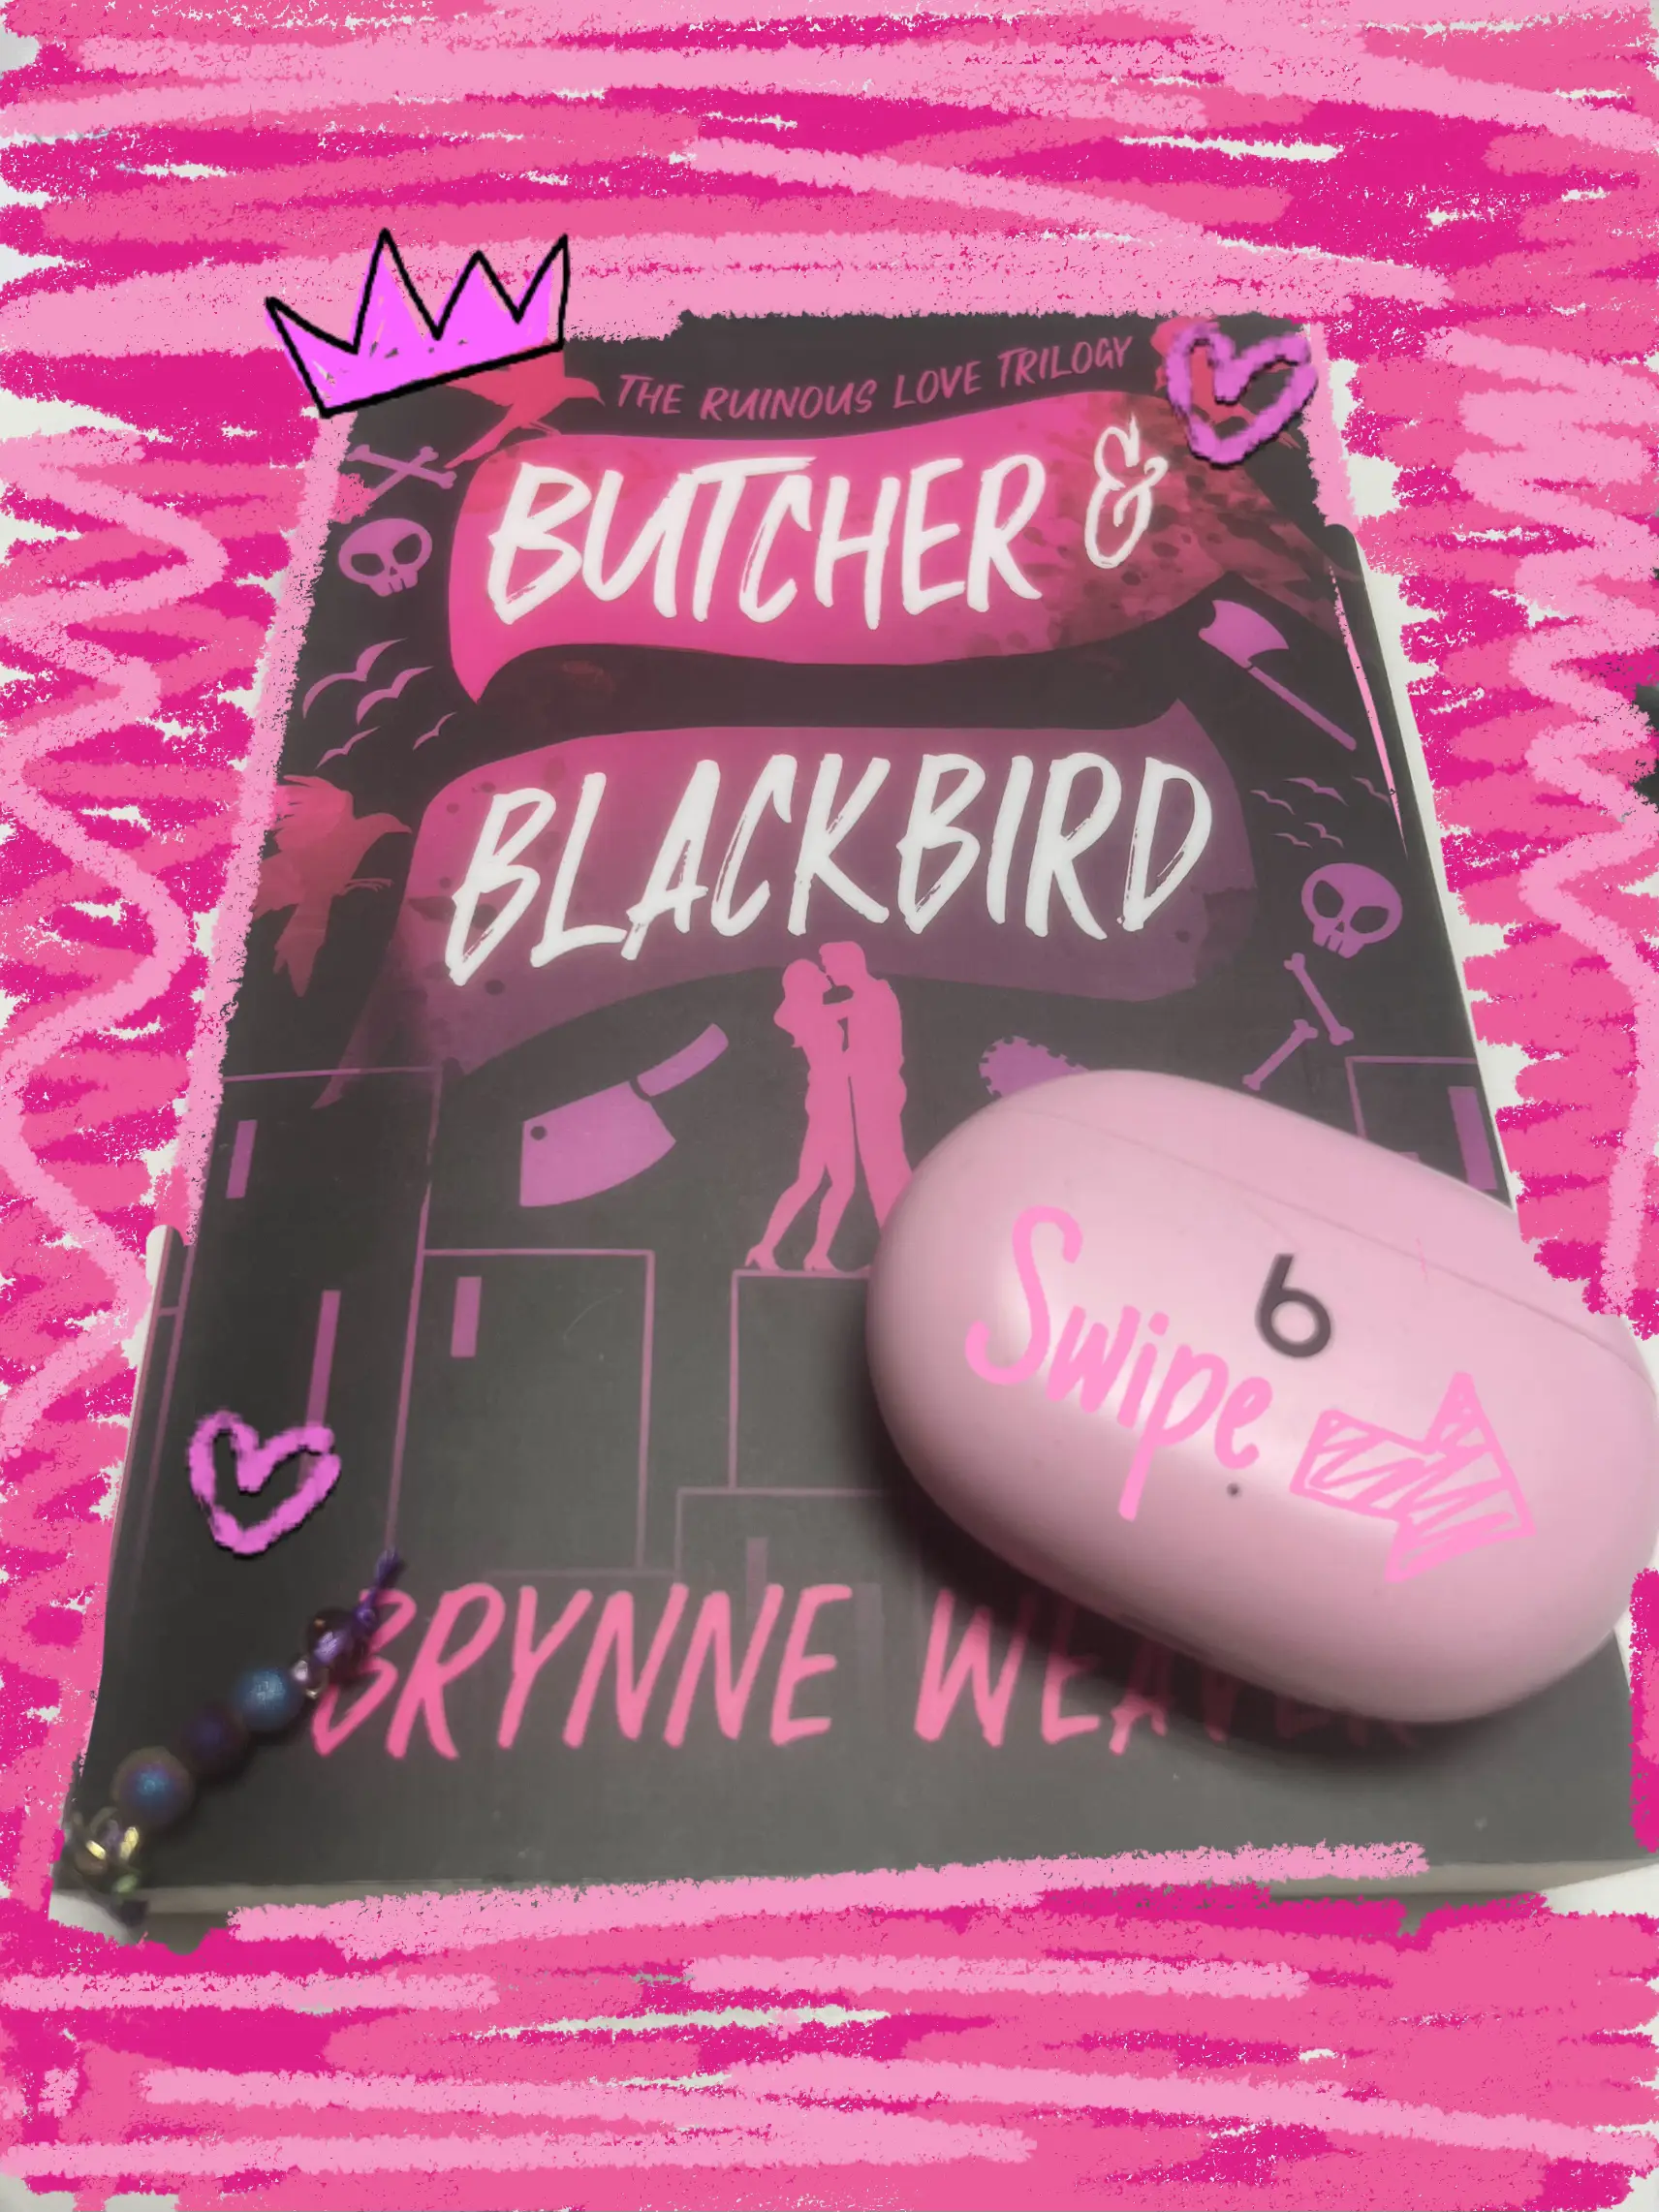 Butcher and Blackbird, the ruinous love trilogy by Brynne Weaver